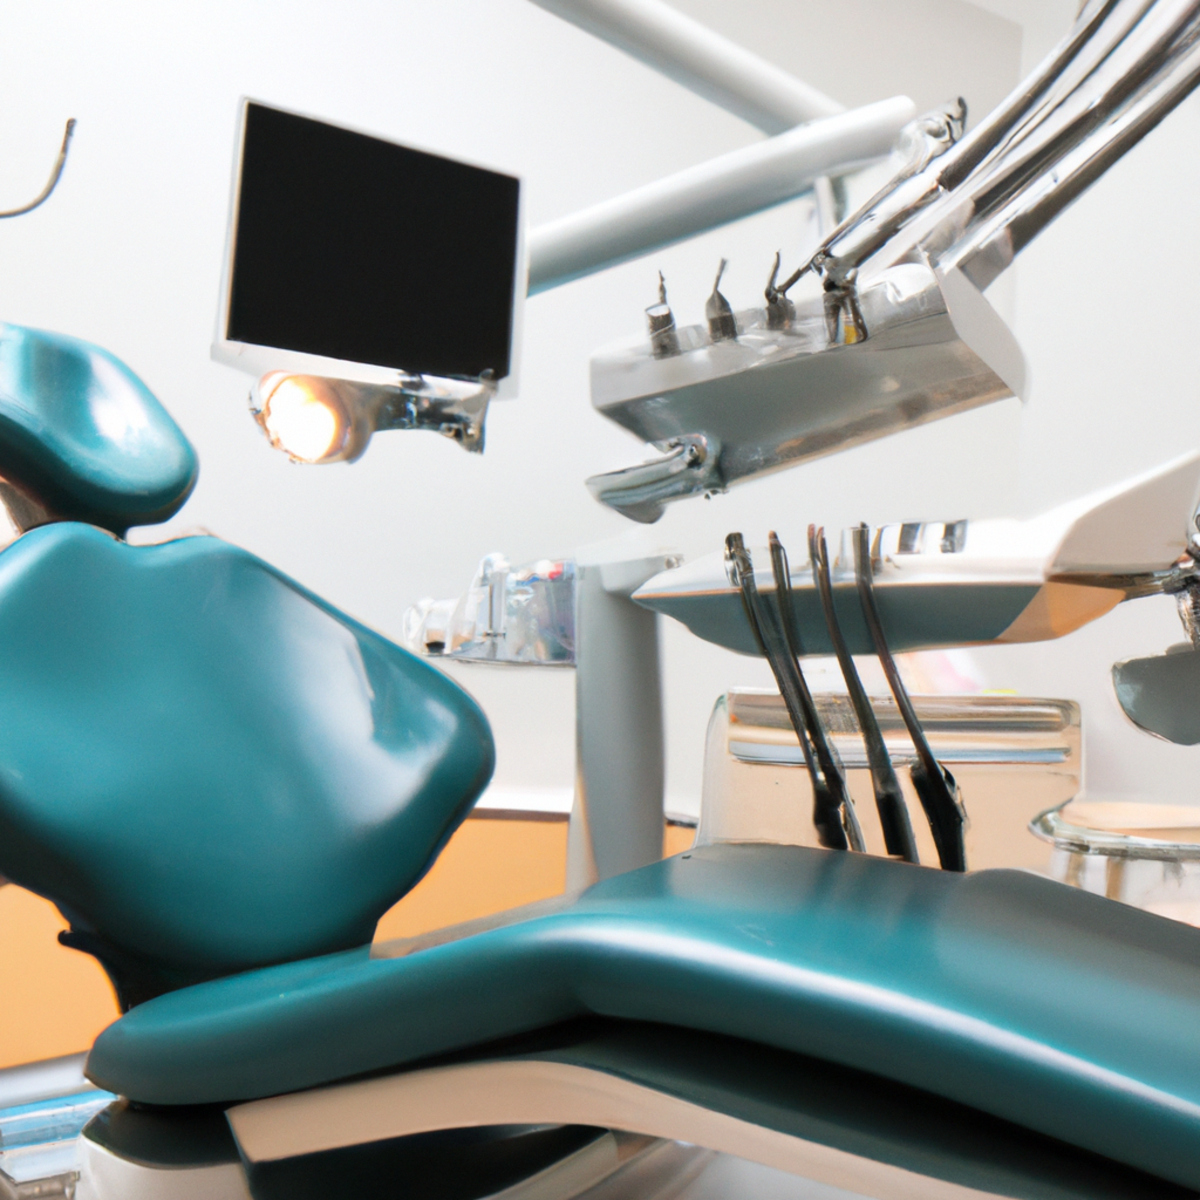 Modern dental clinic with well-lit room, organized equipment, and sterile environment promoting kidney health - Dent disease